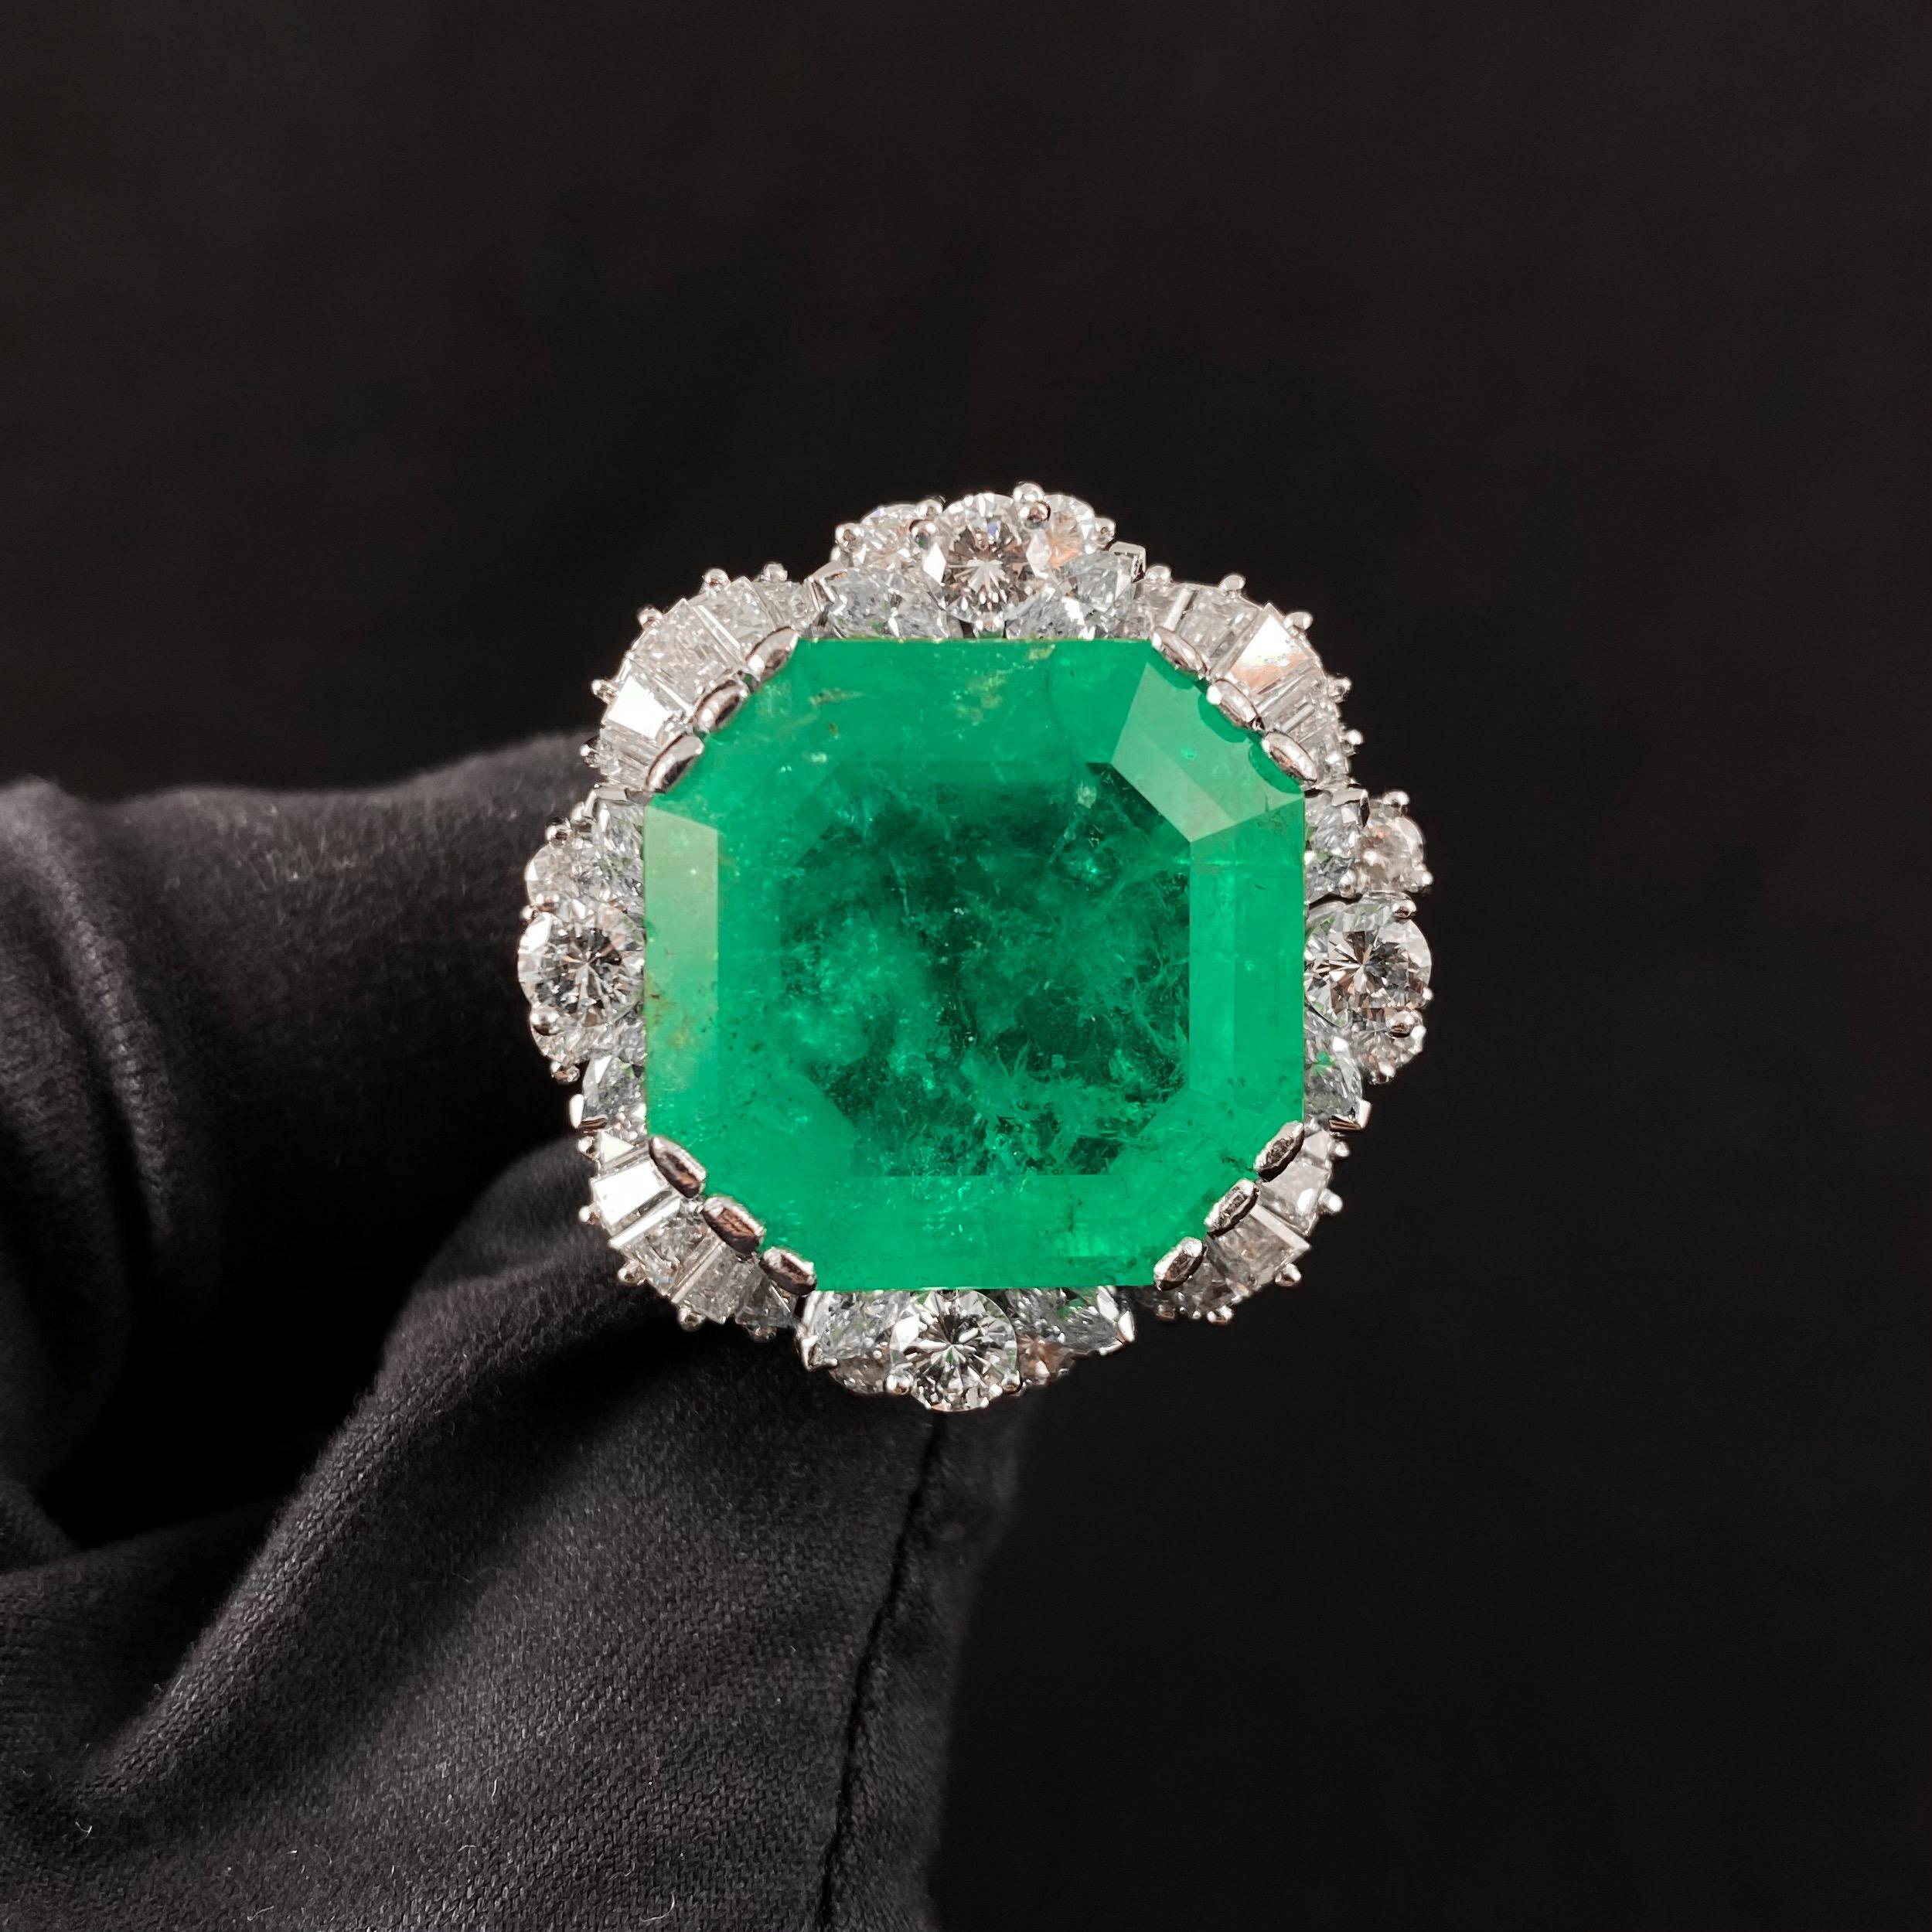 Mid-Century Certified 37.50ct Colombian Emerald and Diamond Cocktail Ring in White Gold, Portugal, 1950s/1960s. This Portuguese jewel features a mesmerizing 37.50 carats emerald of a squared emerald-cut shape claw-set to the centre, surrounded by